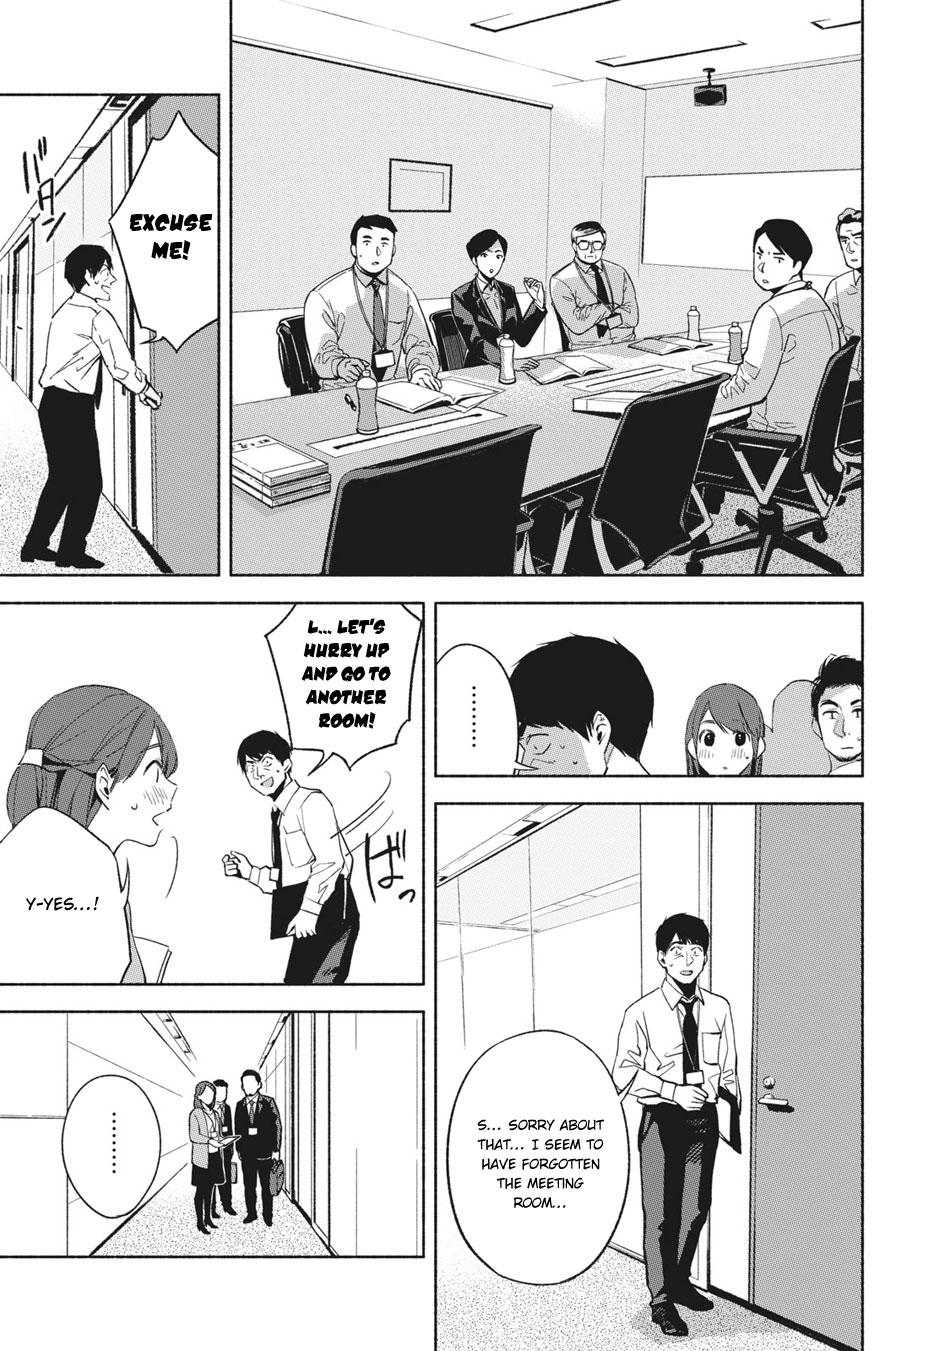 Musume no Tomodachi Vol. 3 Ch. 24 Perforated Cookie Batter